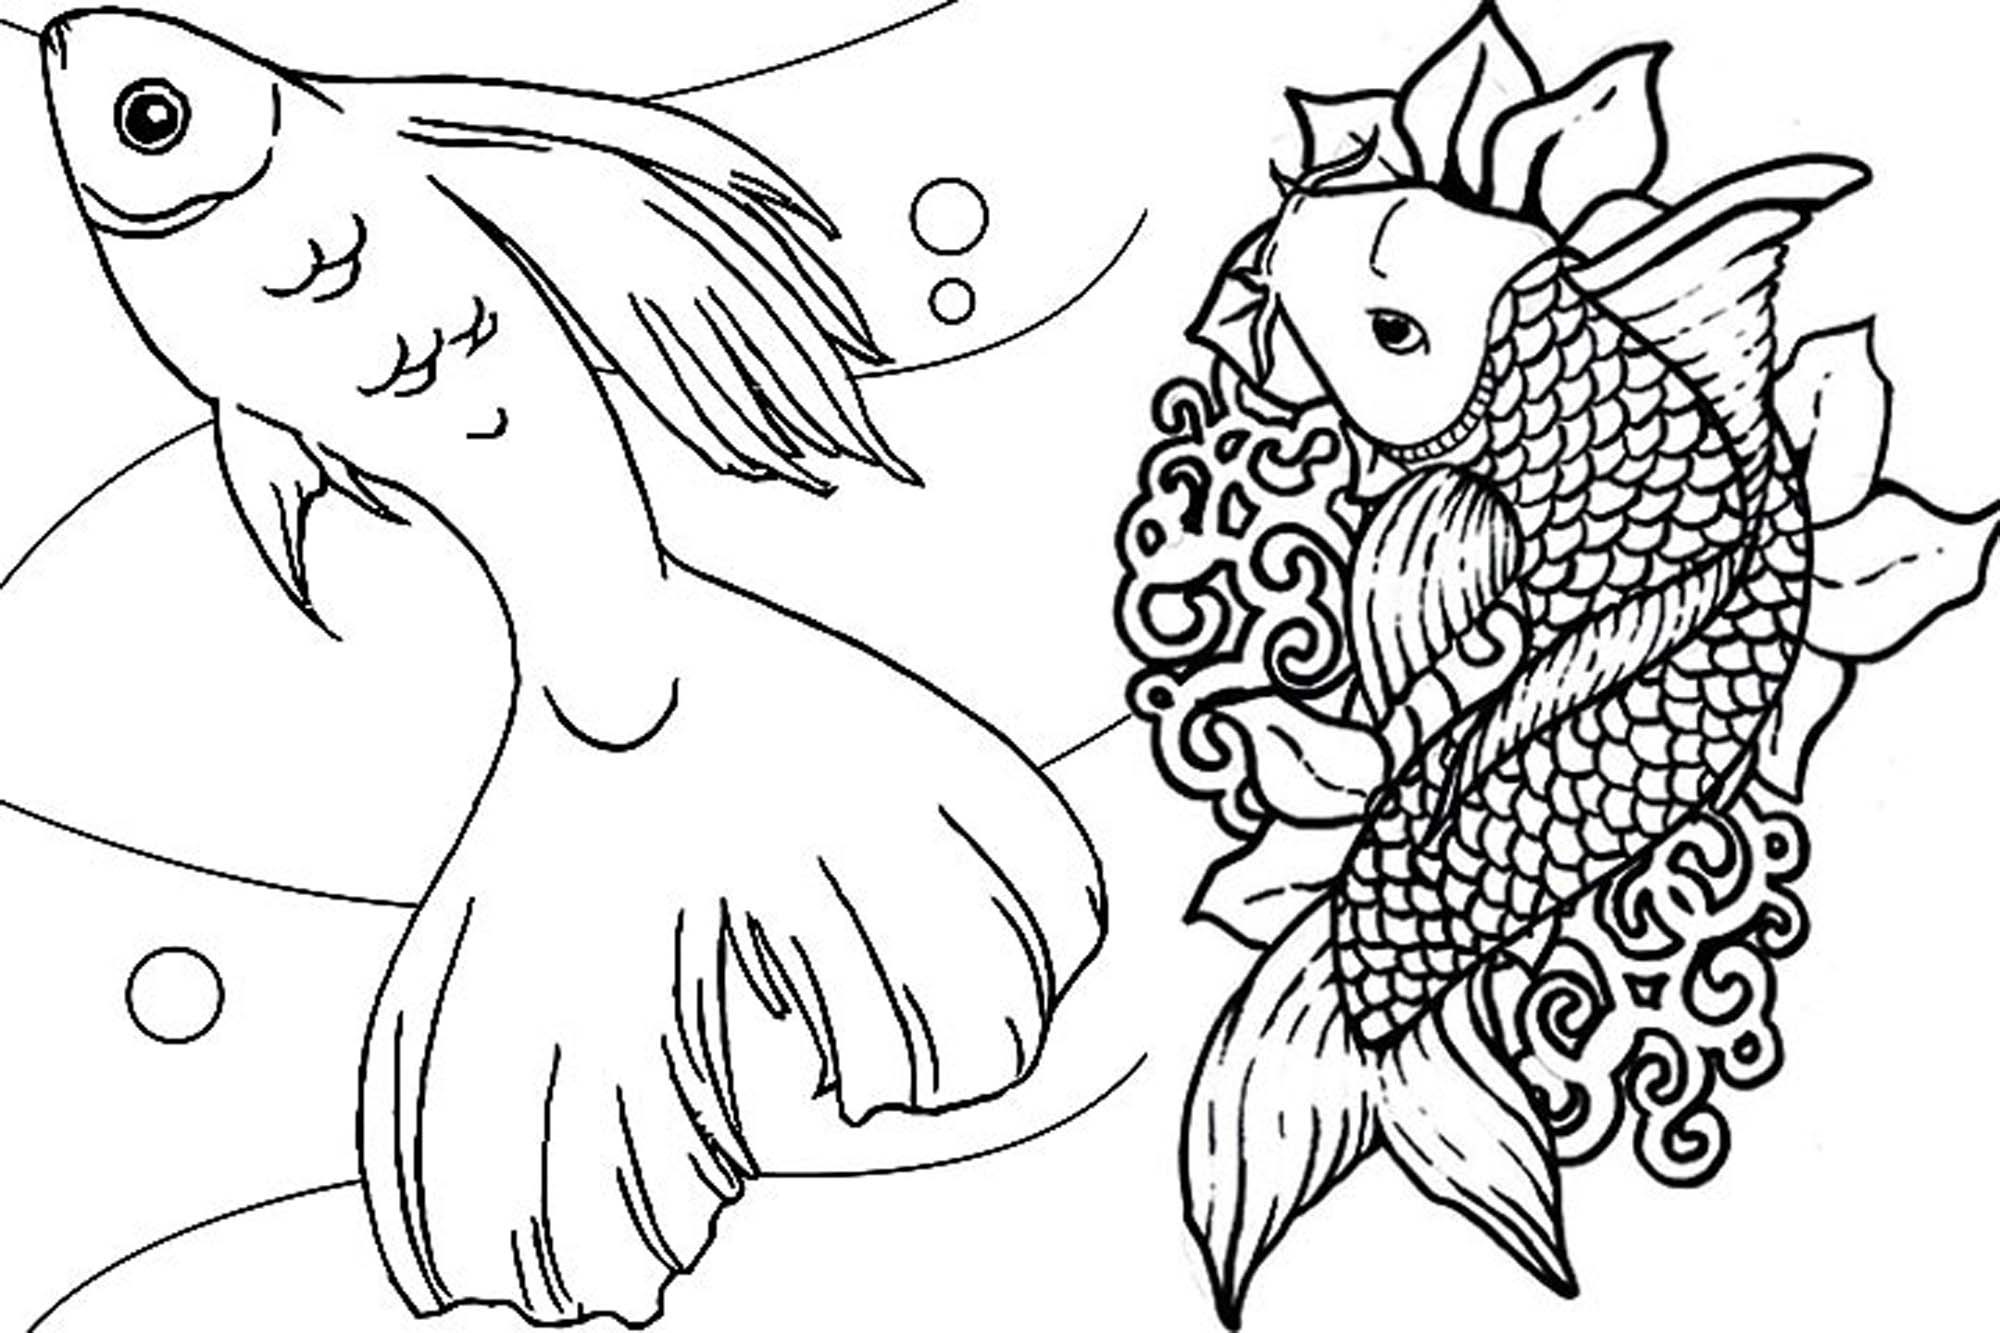 Download Print & Download - Cute and Educative Fish Coloring Pages